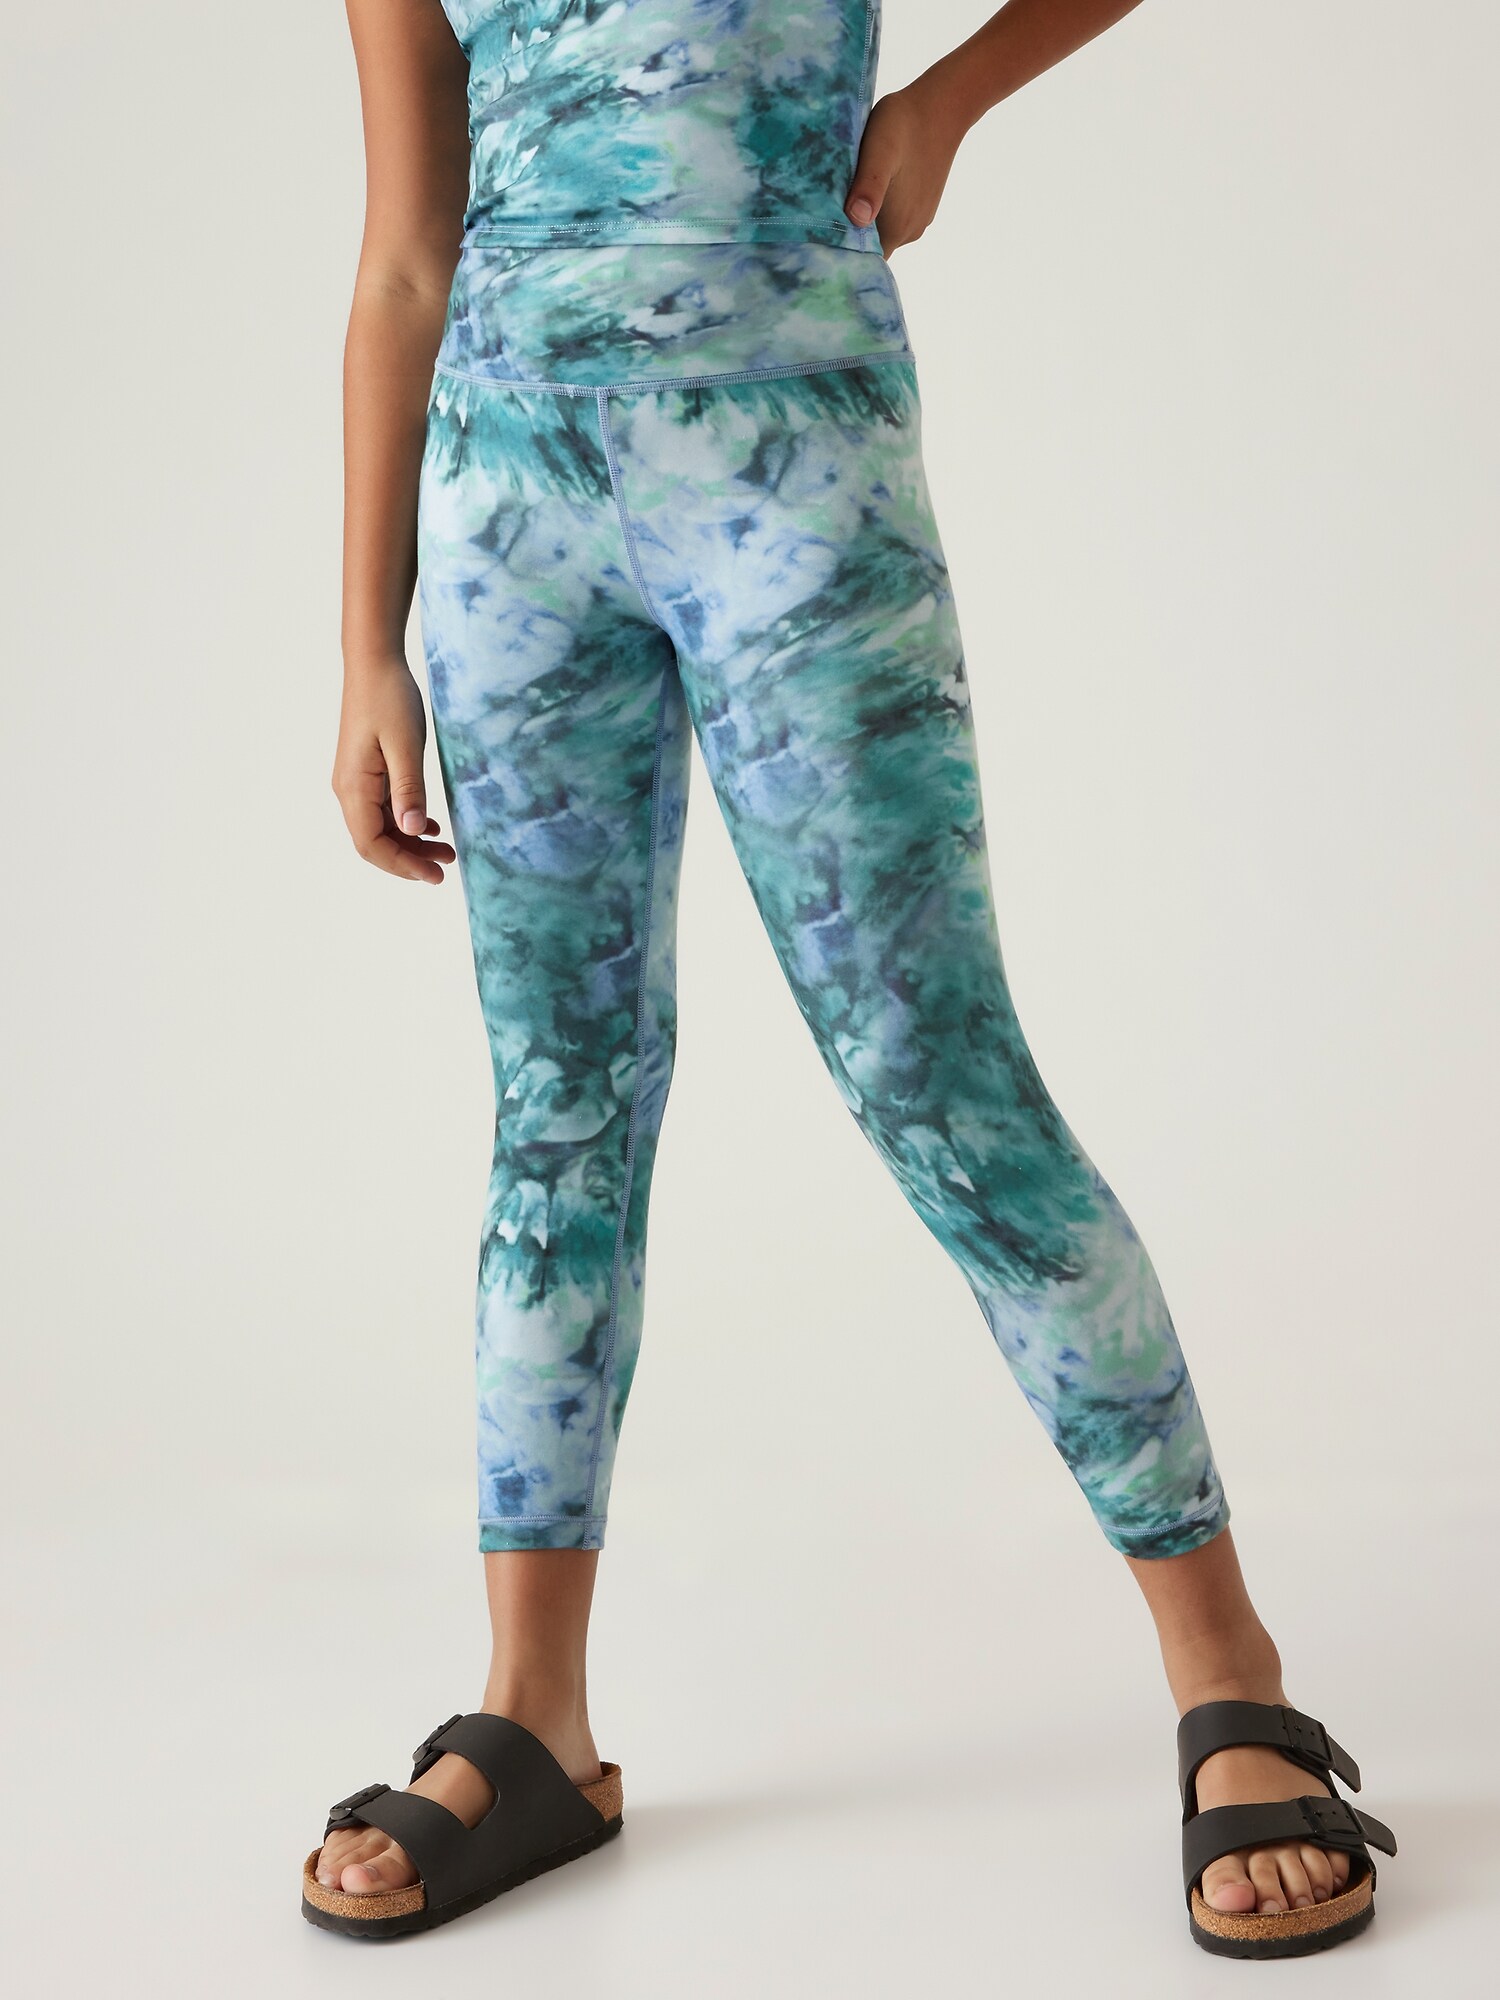 Athleta Girl Spacedye Chit Chat Tight  Girls sports clothes, Leggings  fashion, Sport outfits